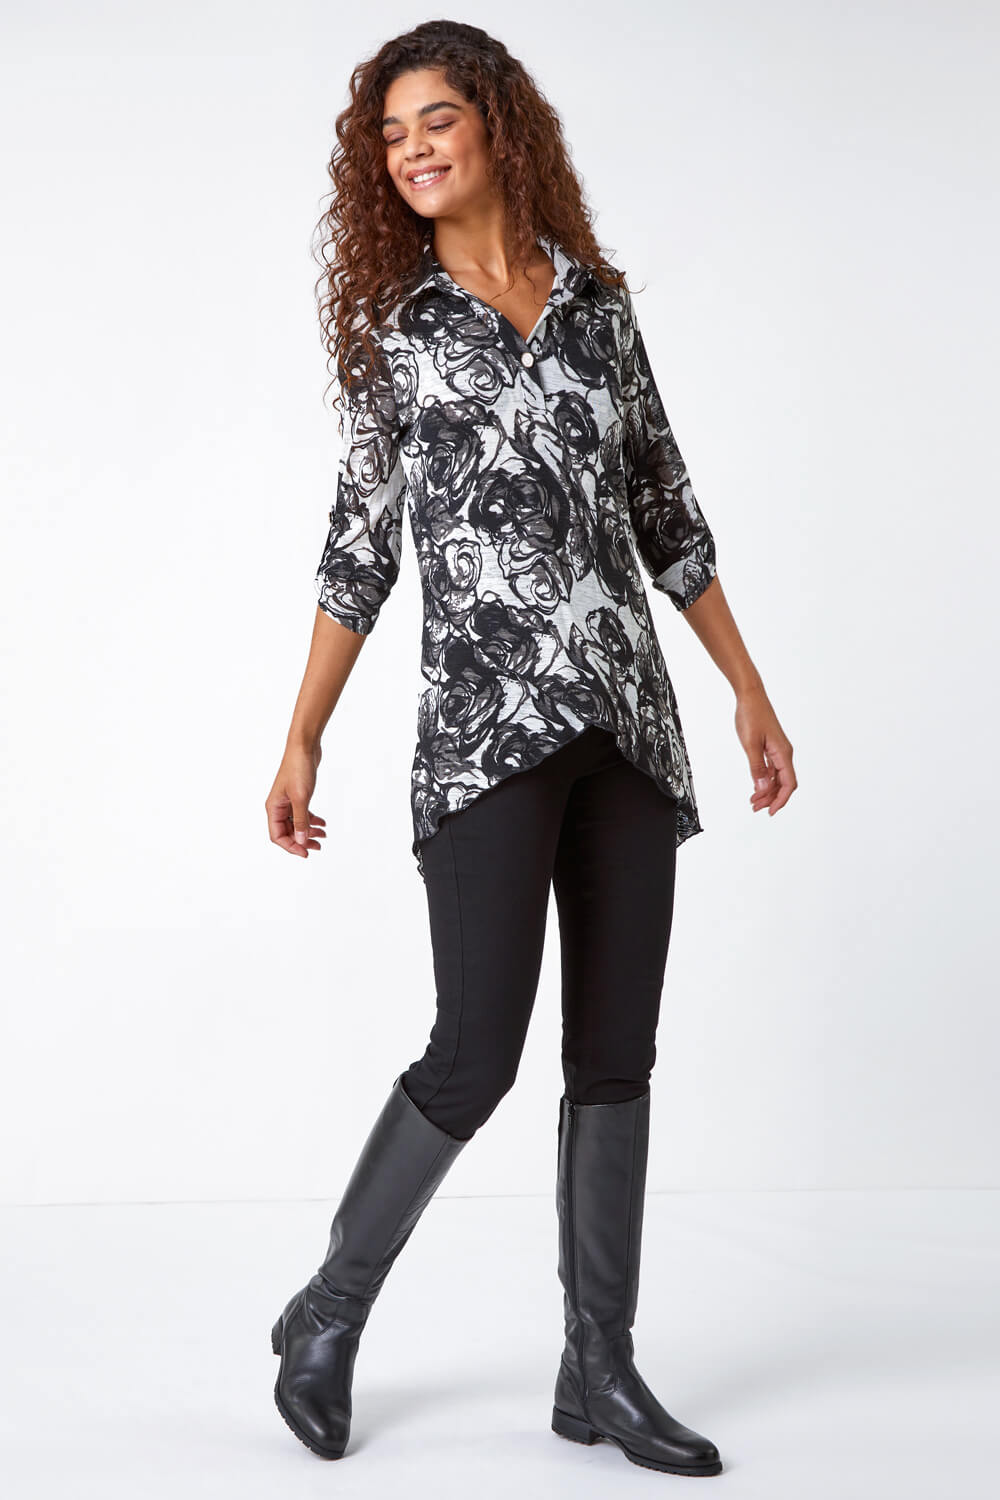 Black Floral Print Collared Stretch Top, Image 2 of 5